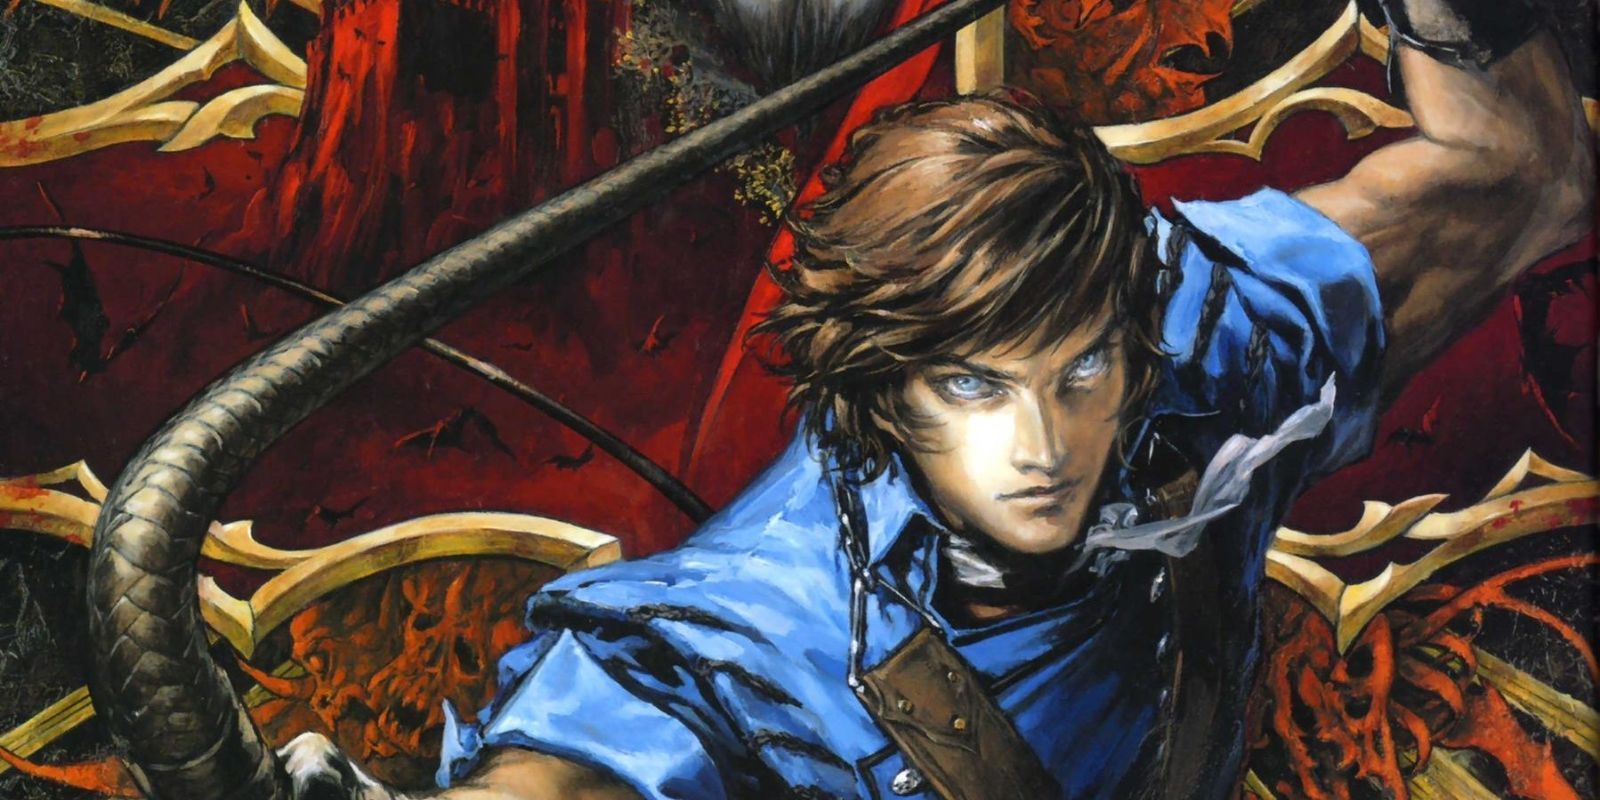 Richter Belmont in cover art for Castlevania: Rondo Of Blood